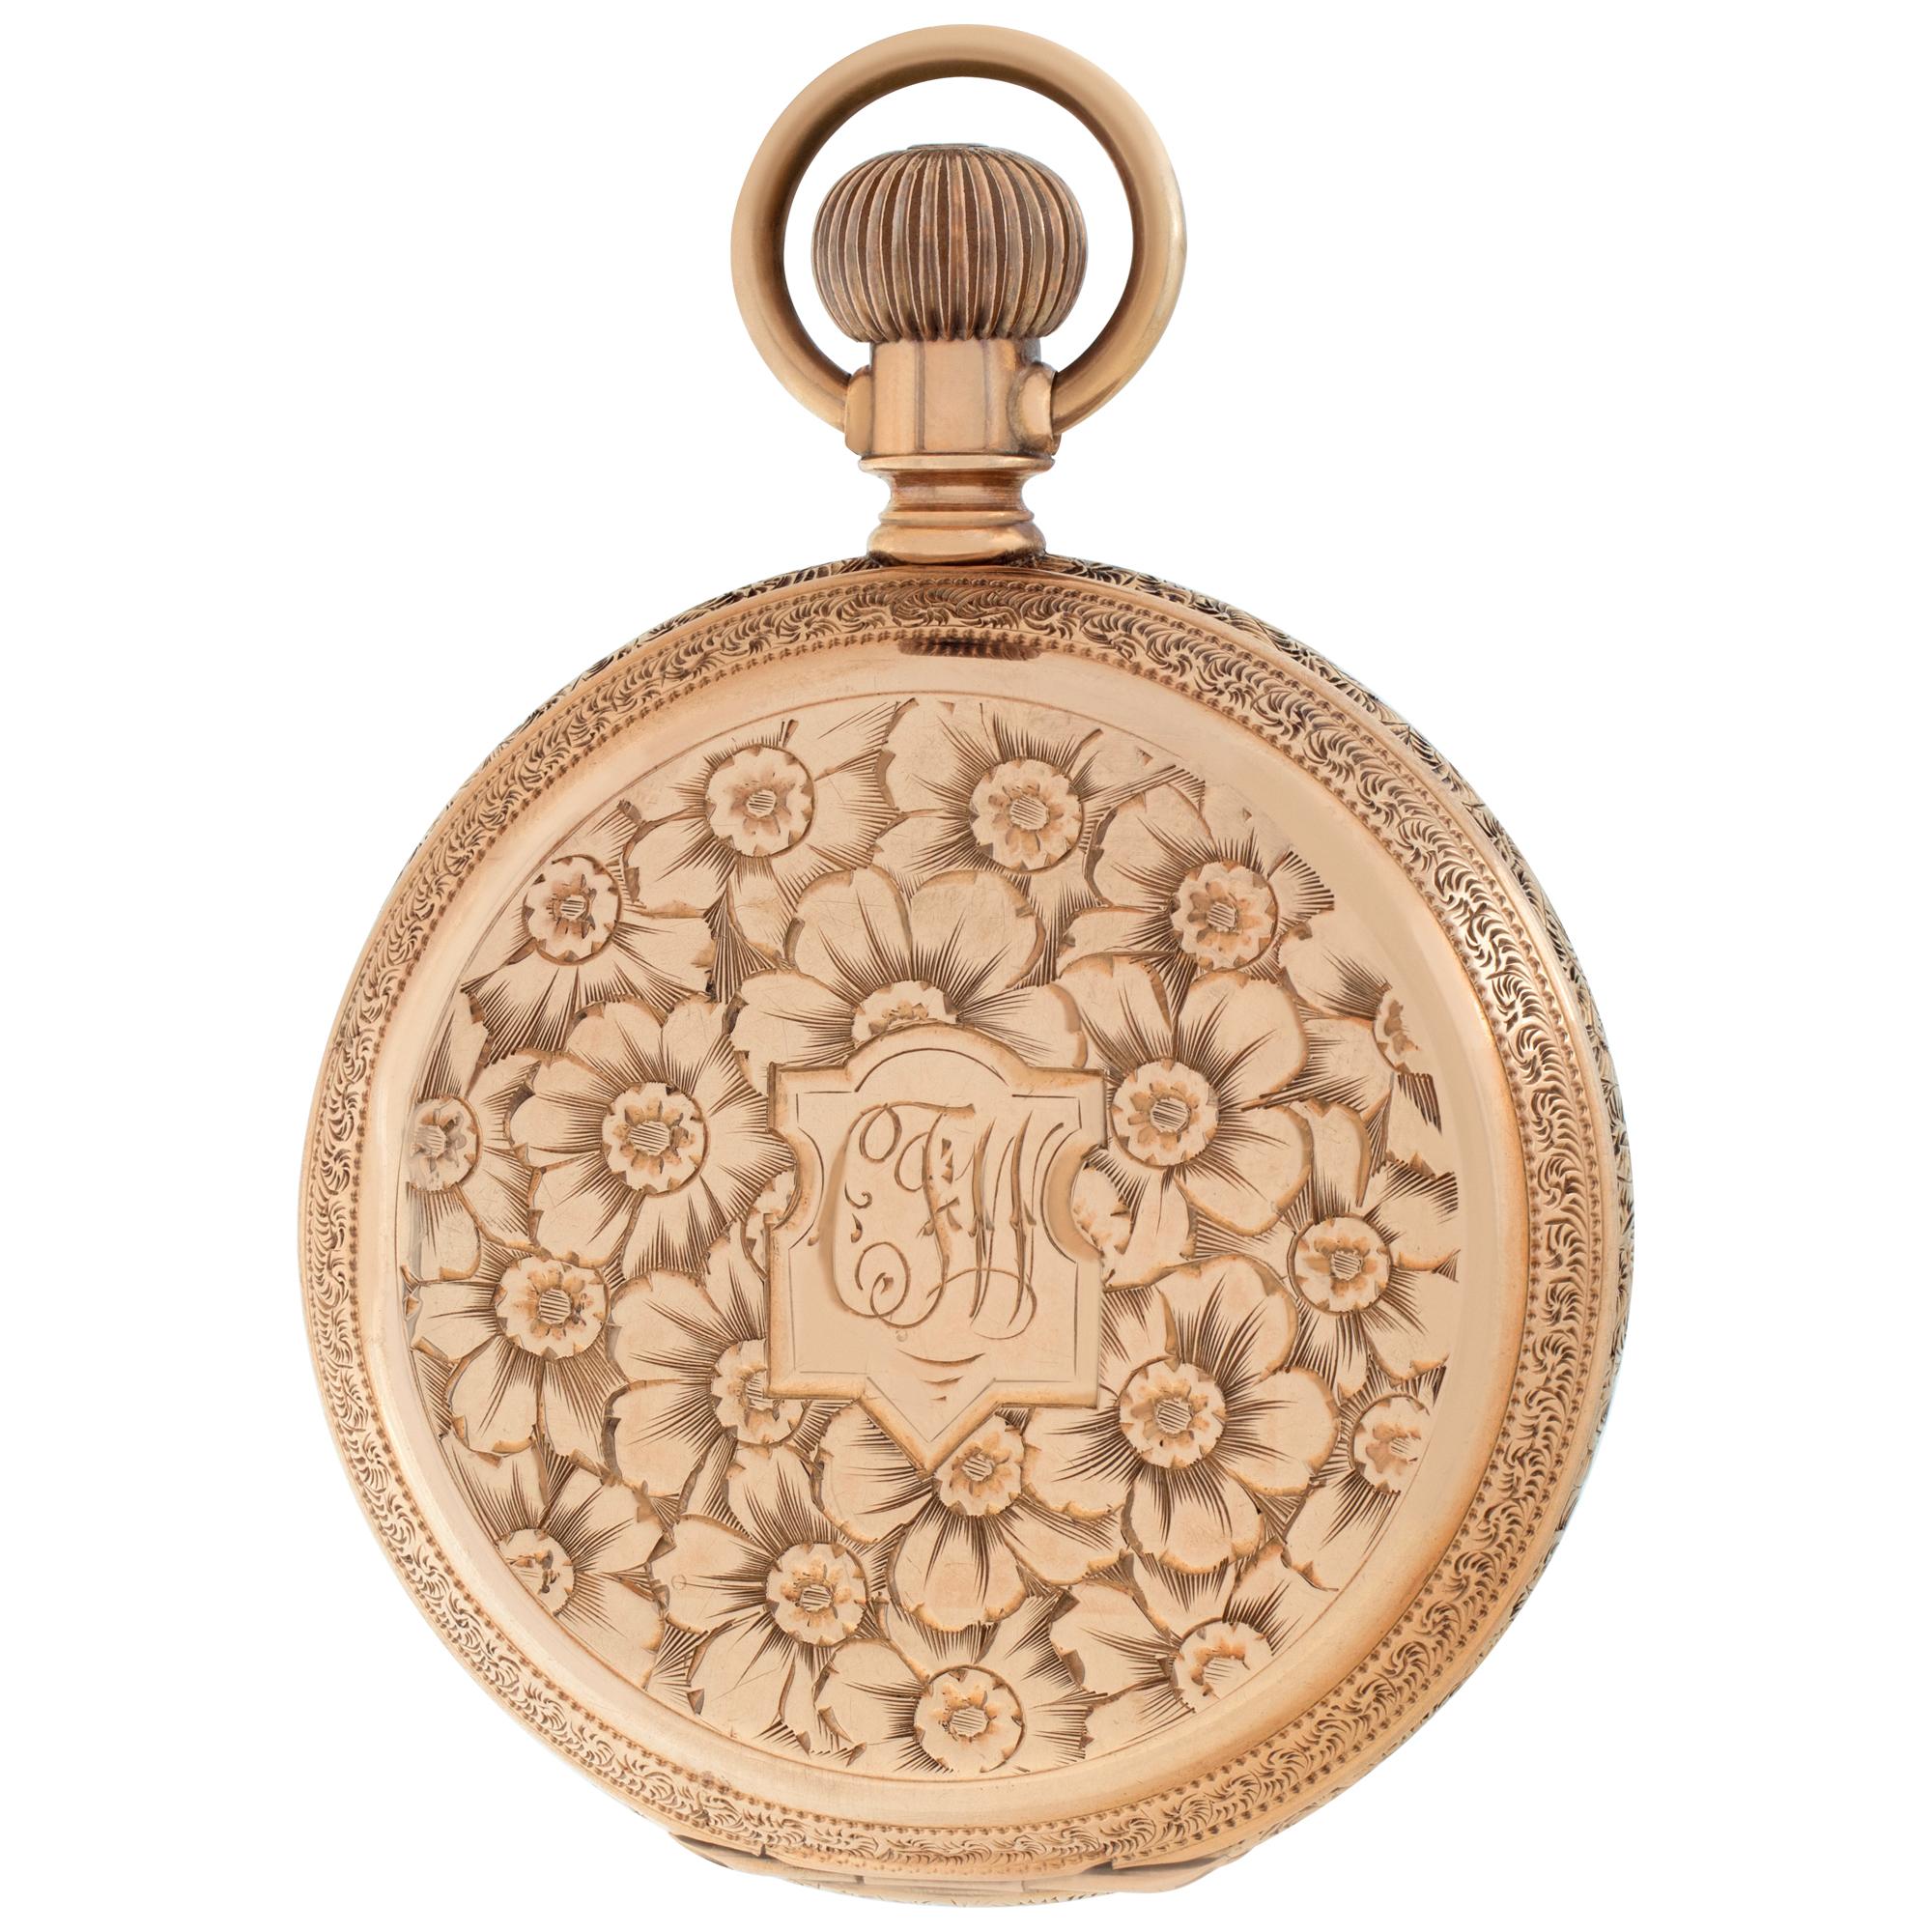 Are Elgin pocket watches worth anything?